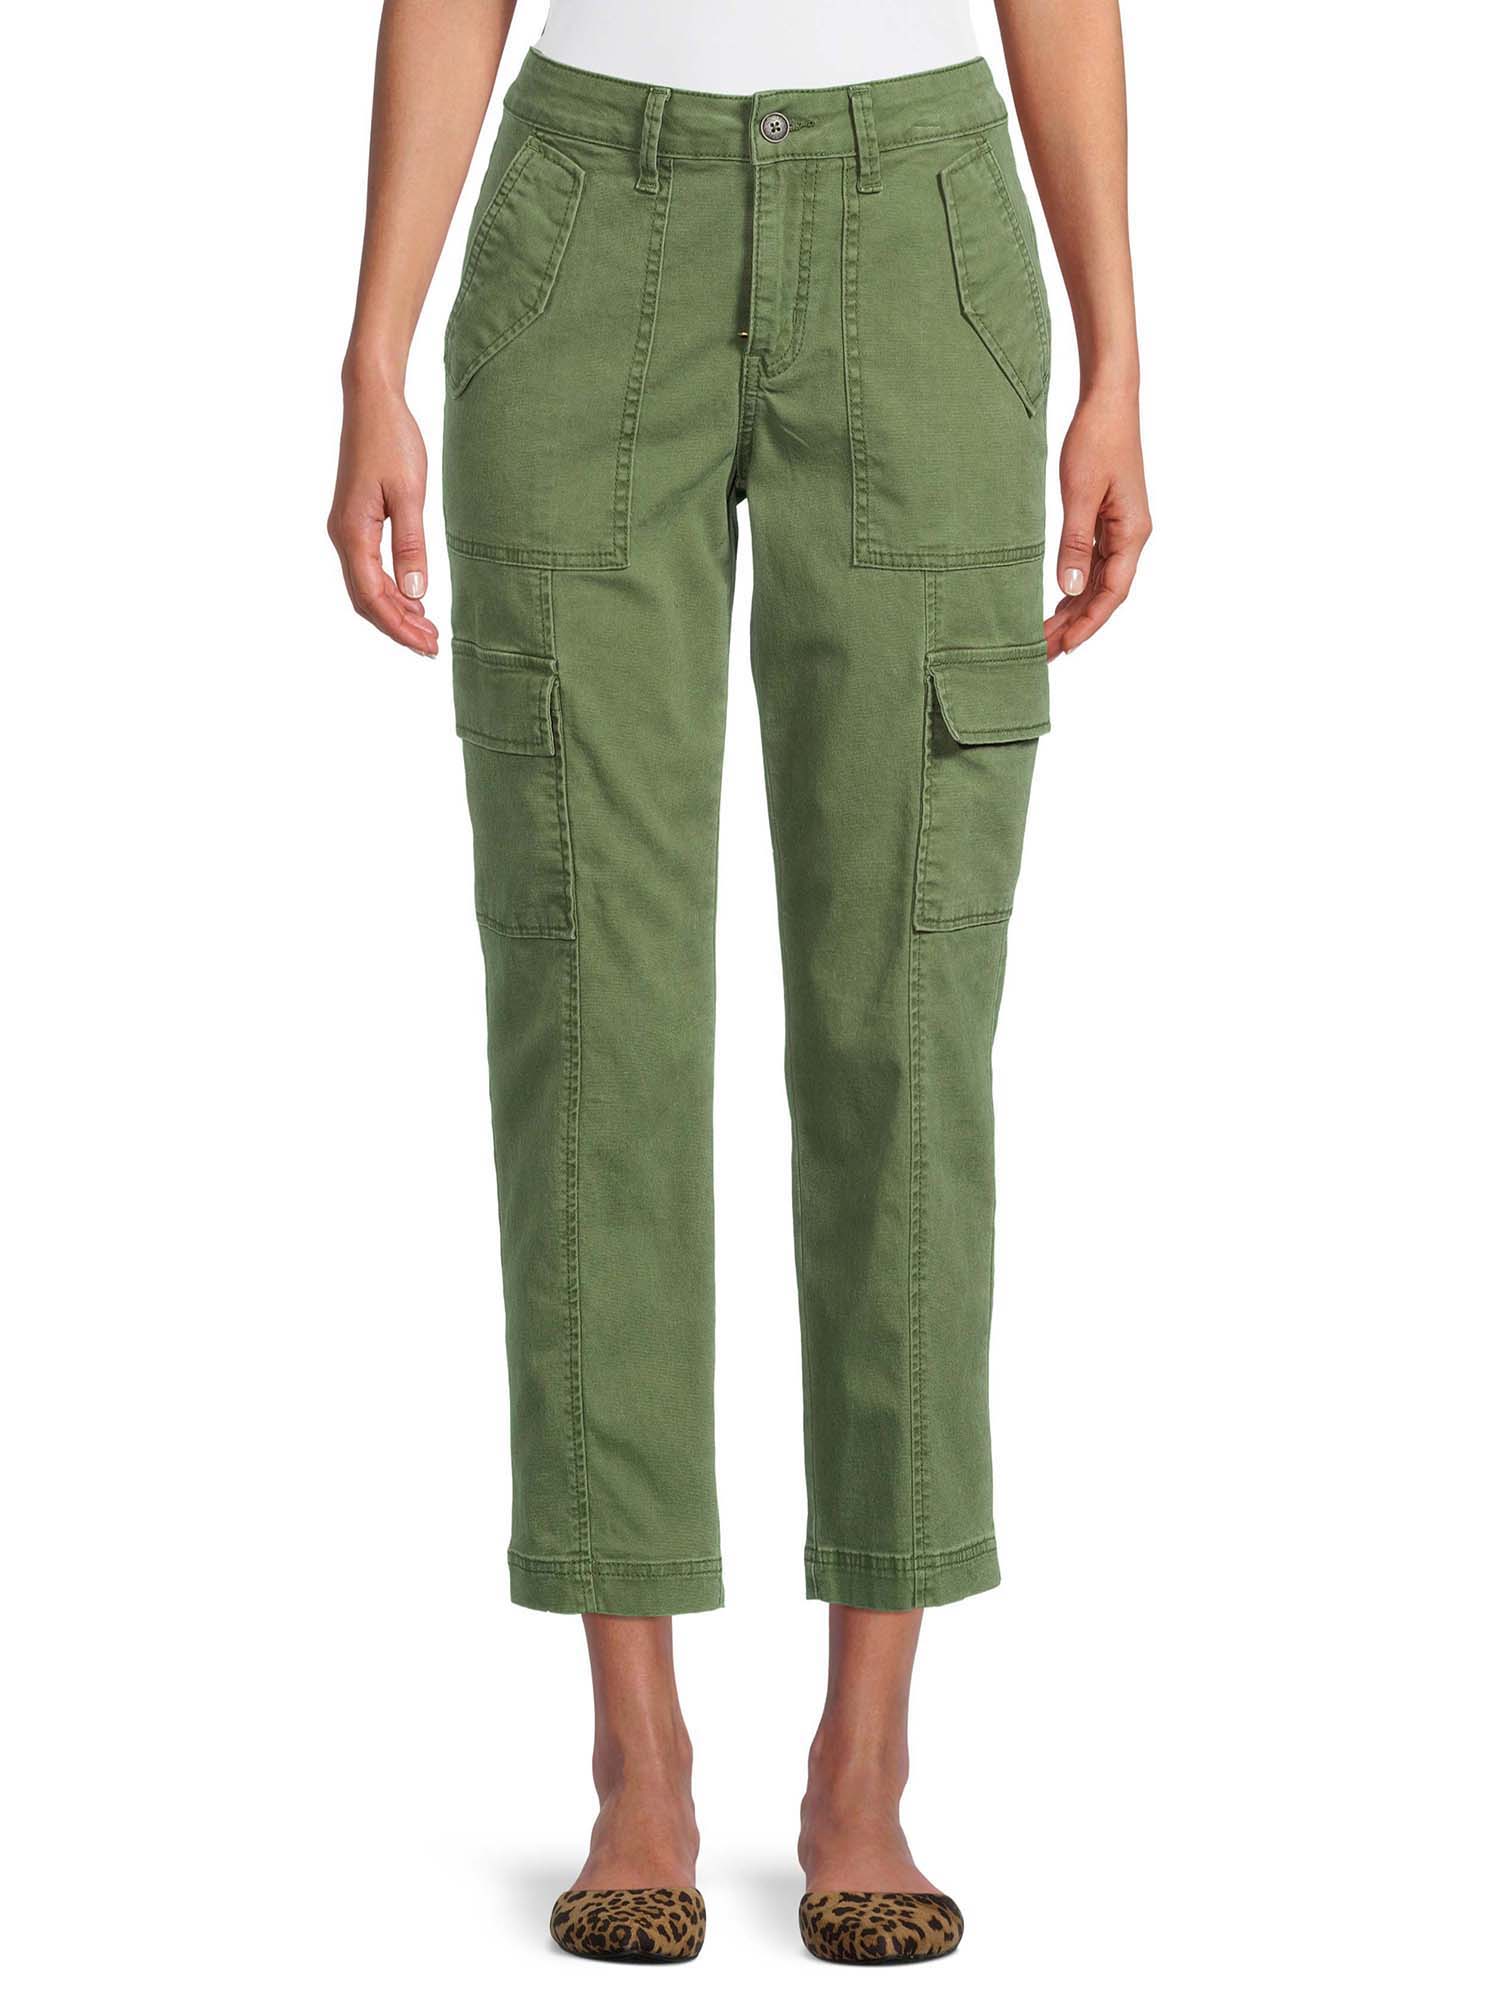 Time and Tru Women's Cargo Pants - image 1 of 5